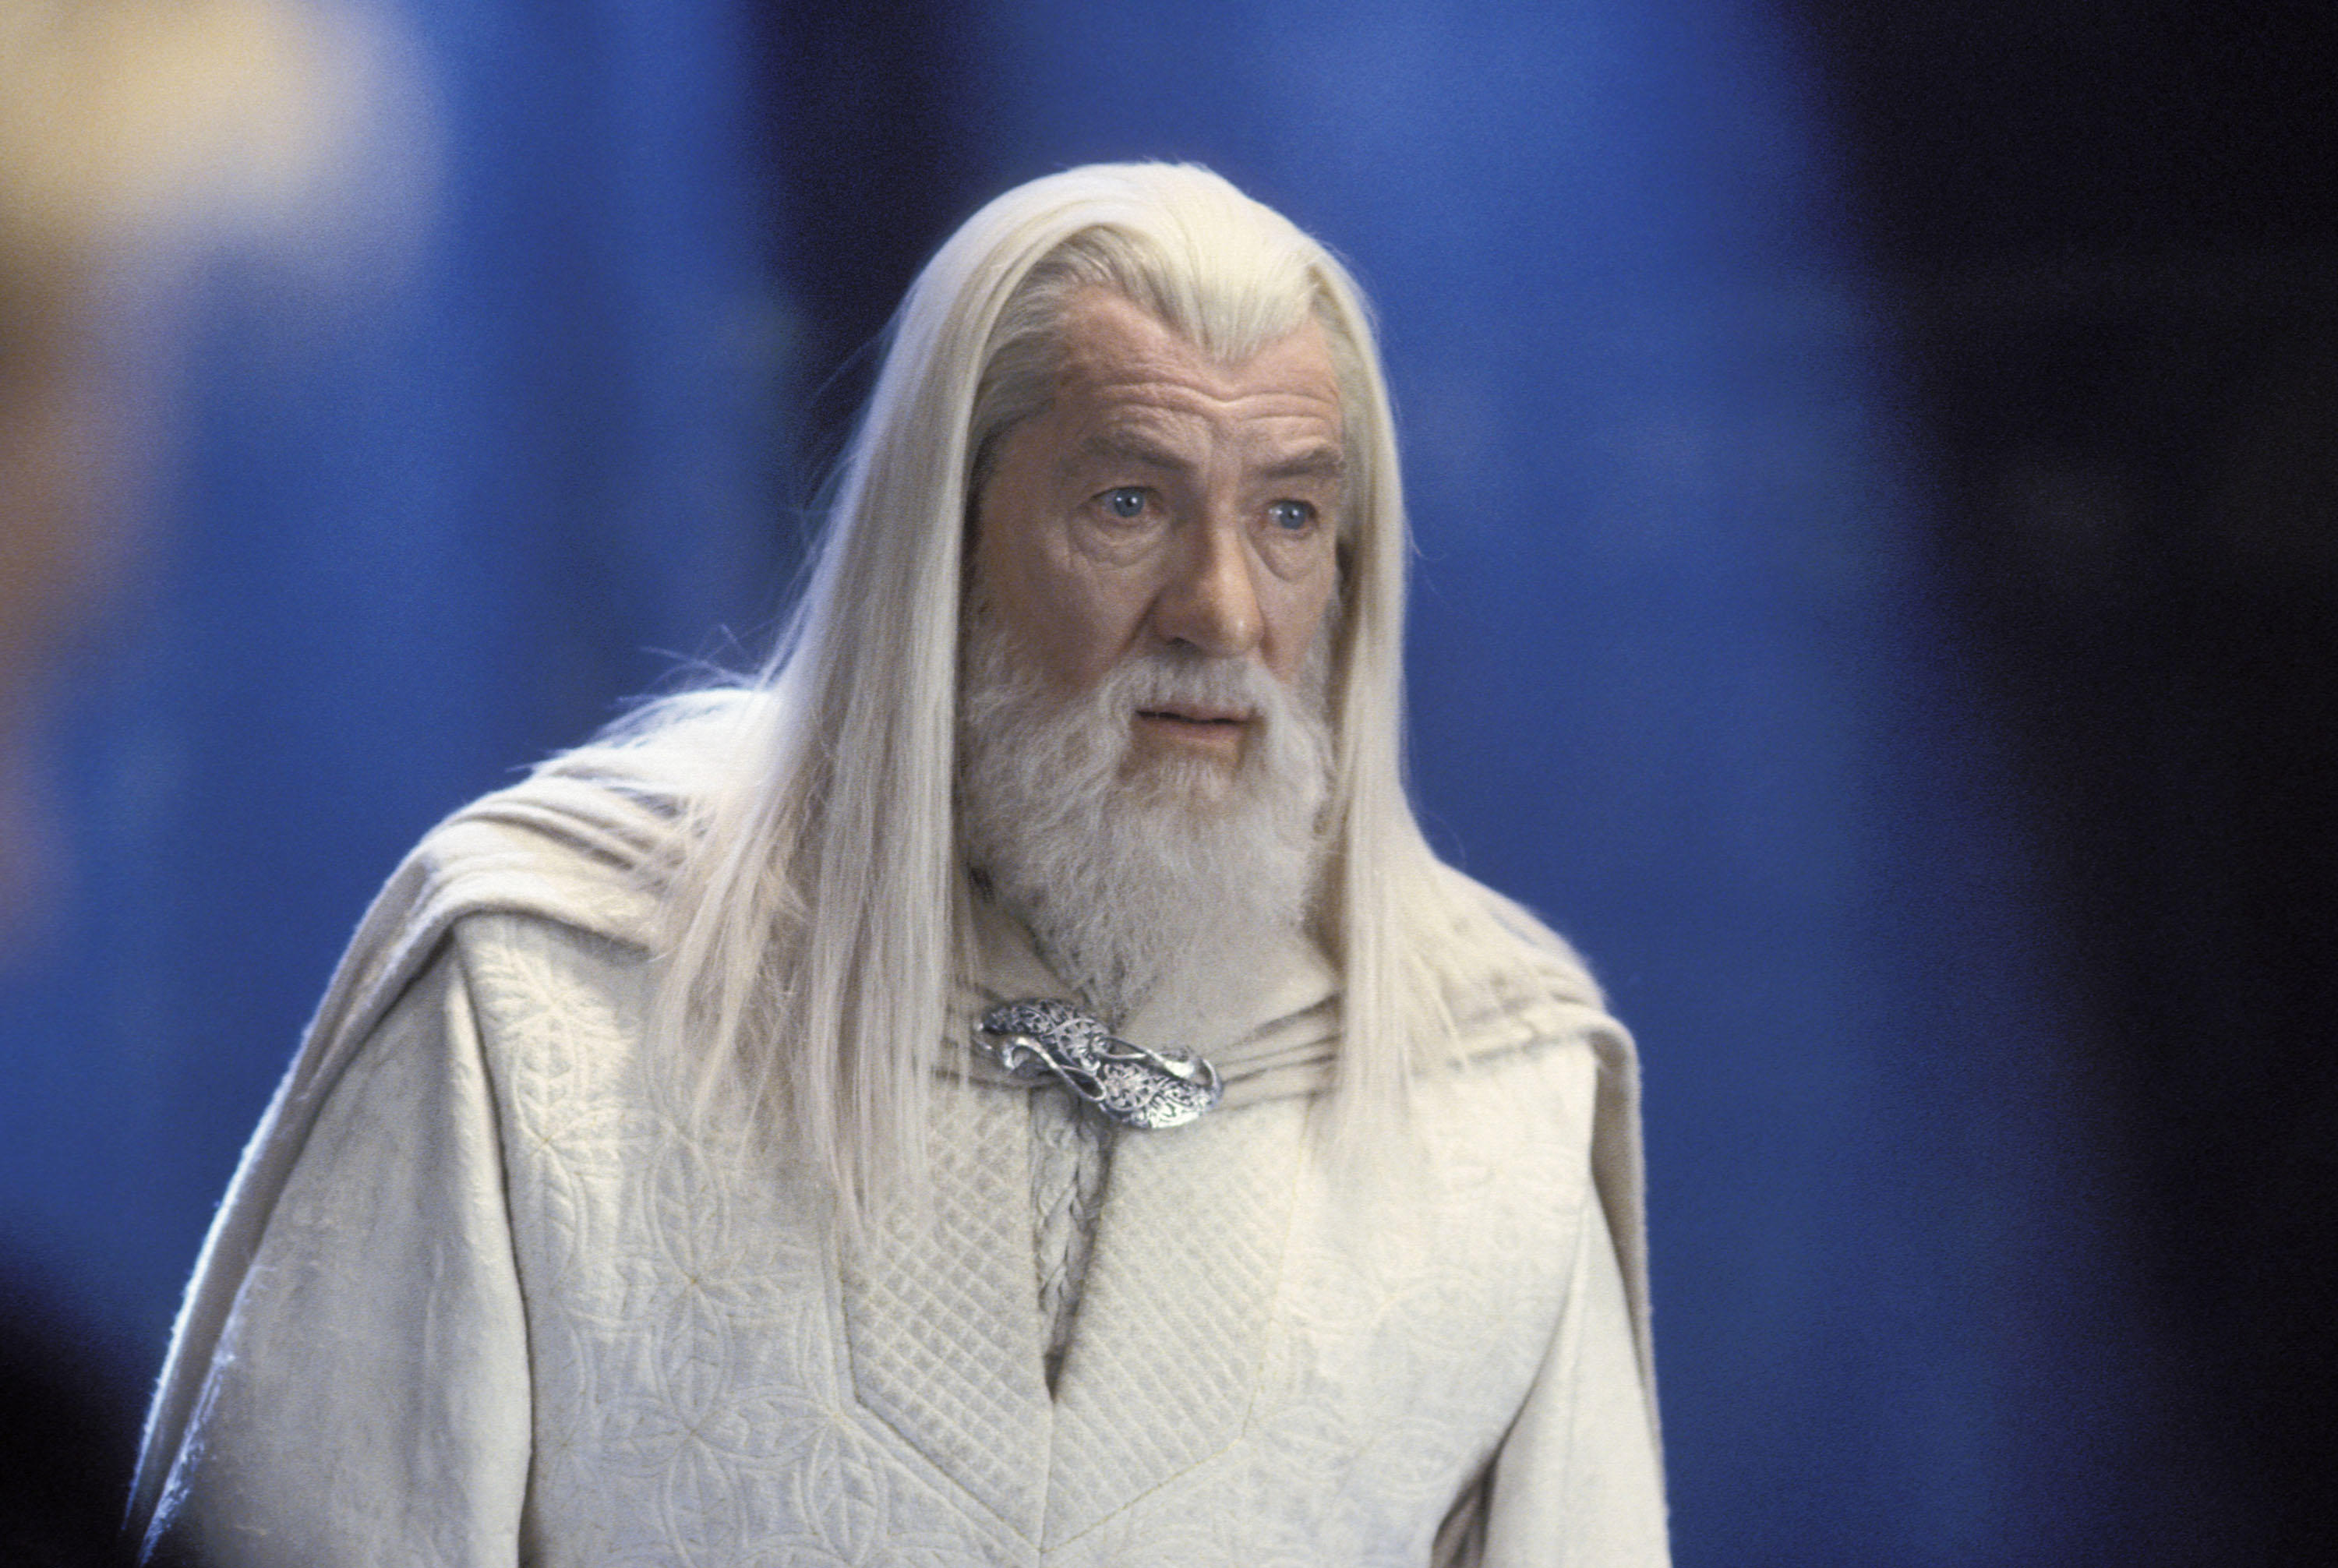  Sir Ian is best known for starring in the Lord of the Rings trilogy